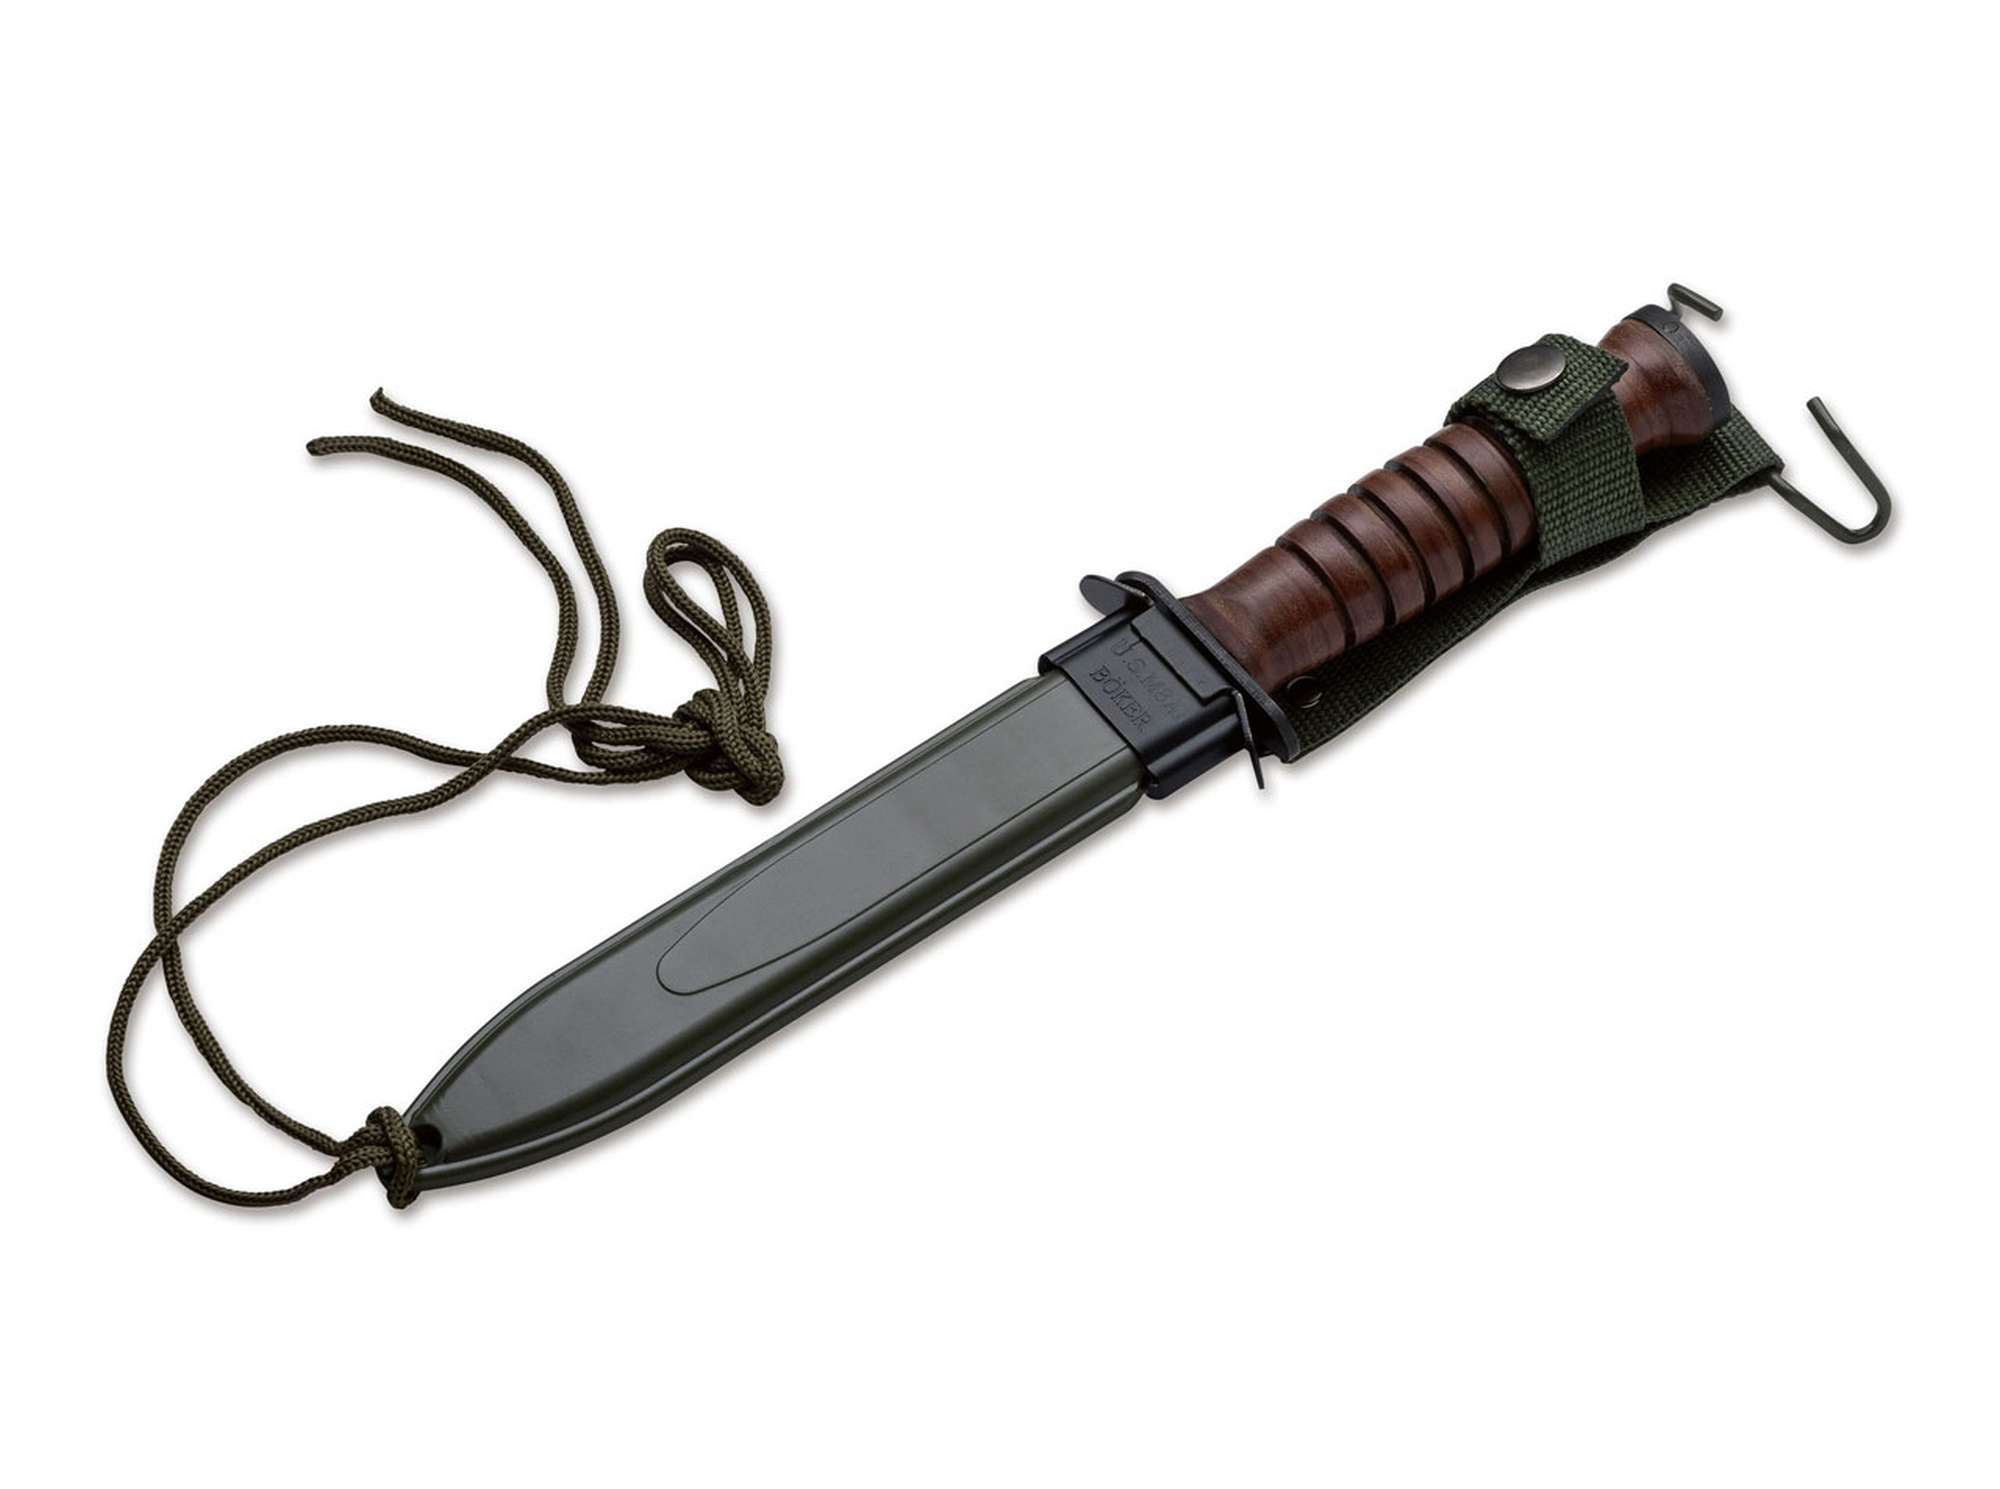 M3 Trench Knife 2.1